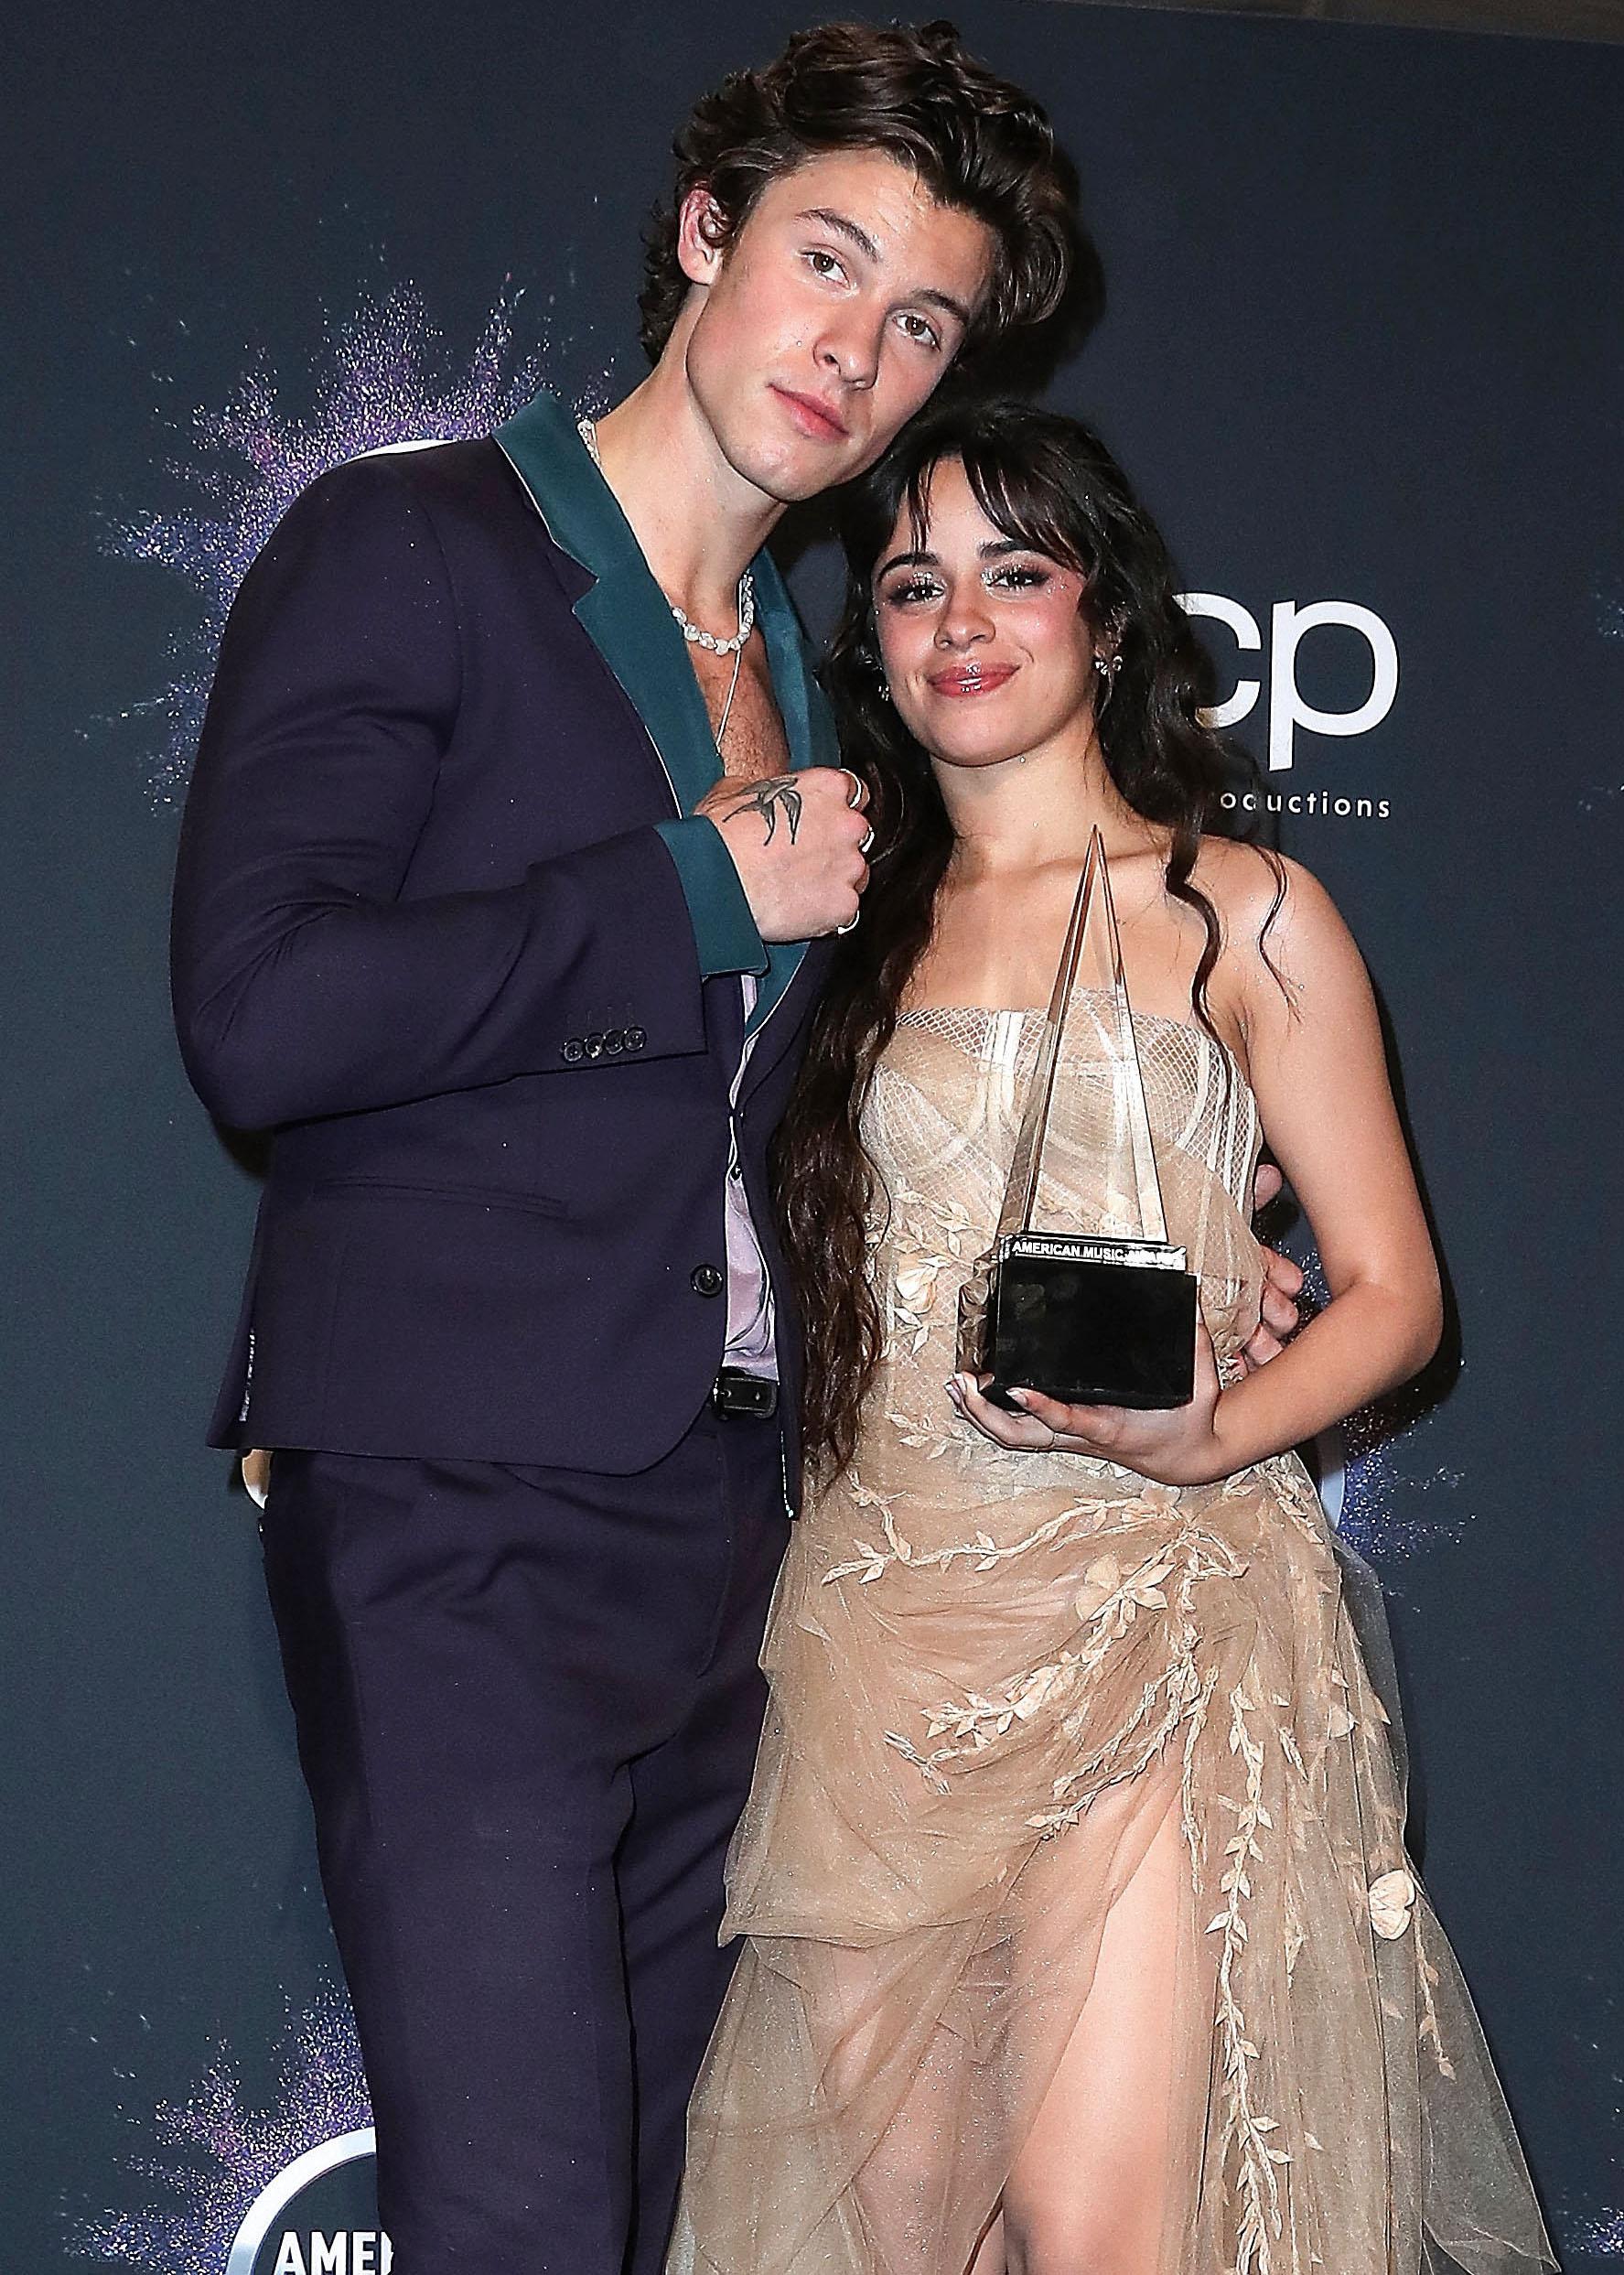 Camila Cabello and Shawn Mendes smiling